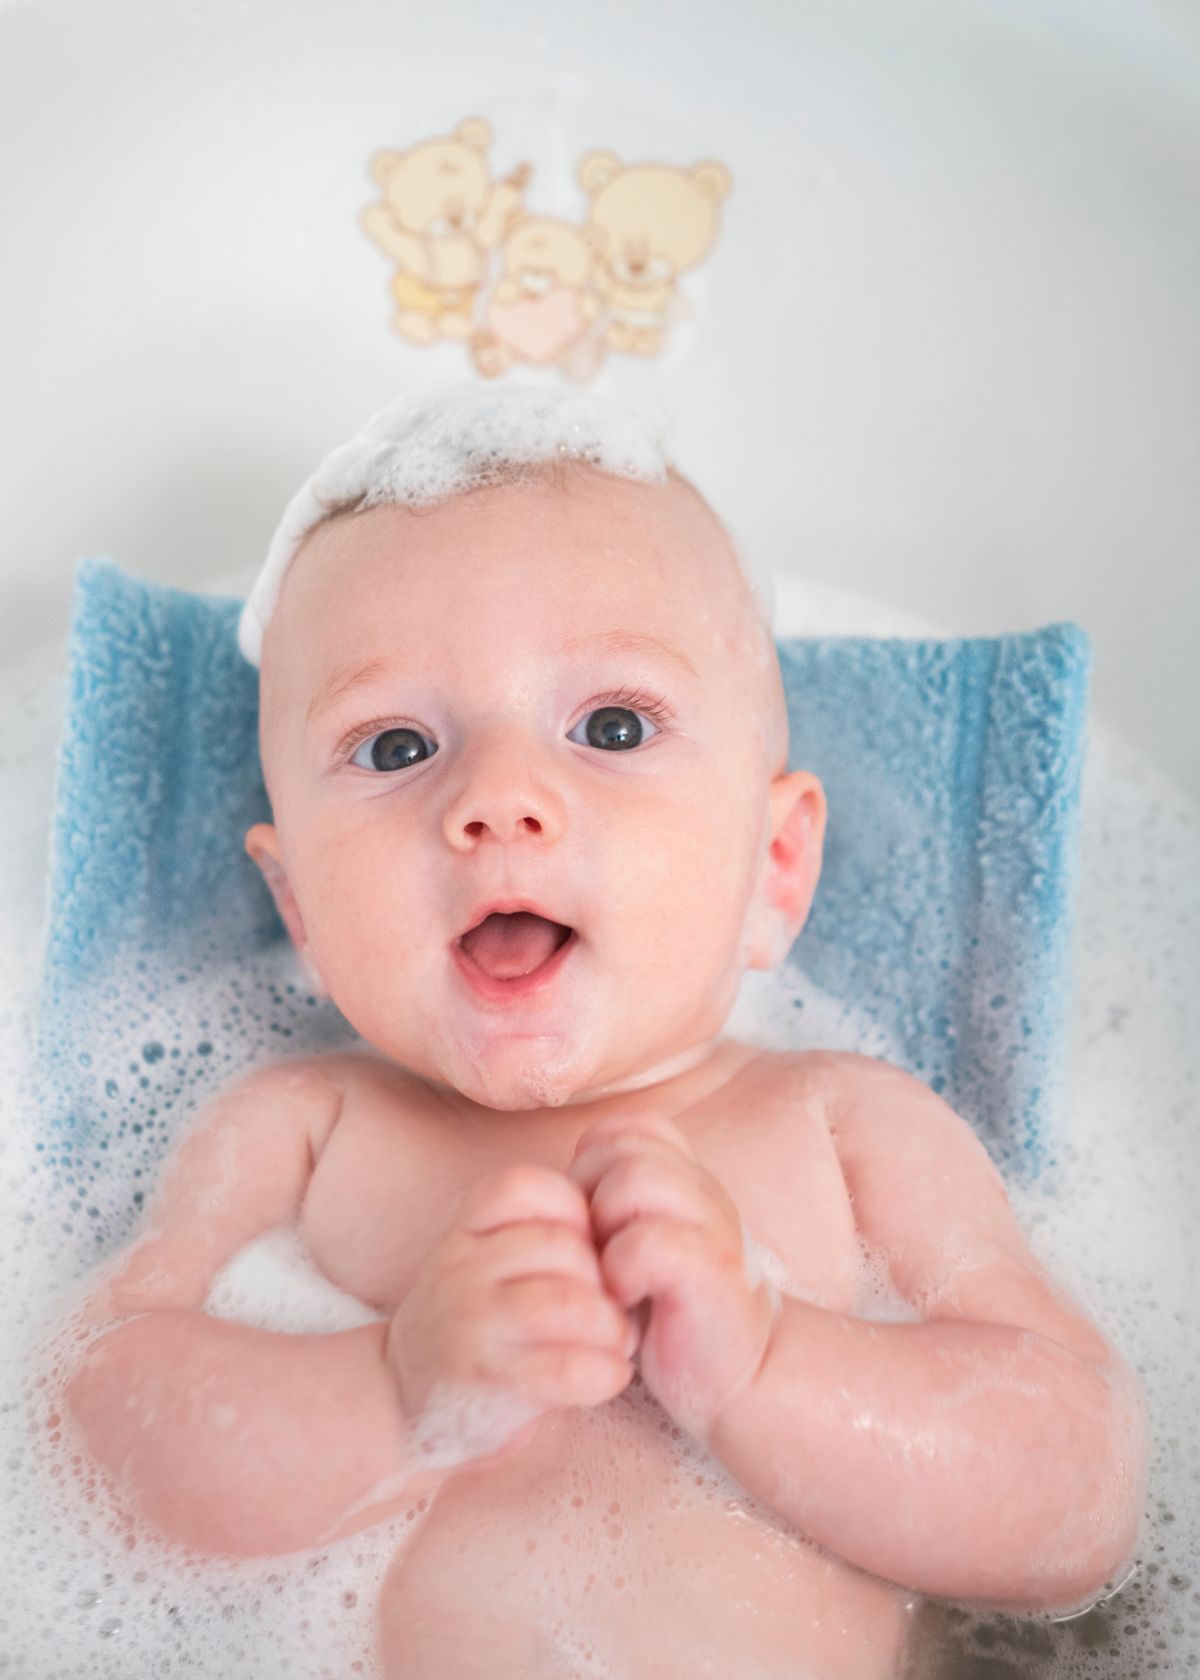 5 Best Body Washes for Kids: Gentle, Natural, and Fun Formulas